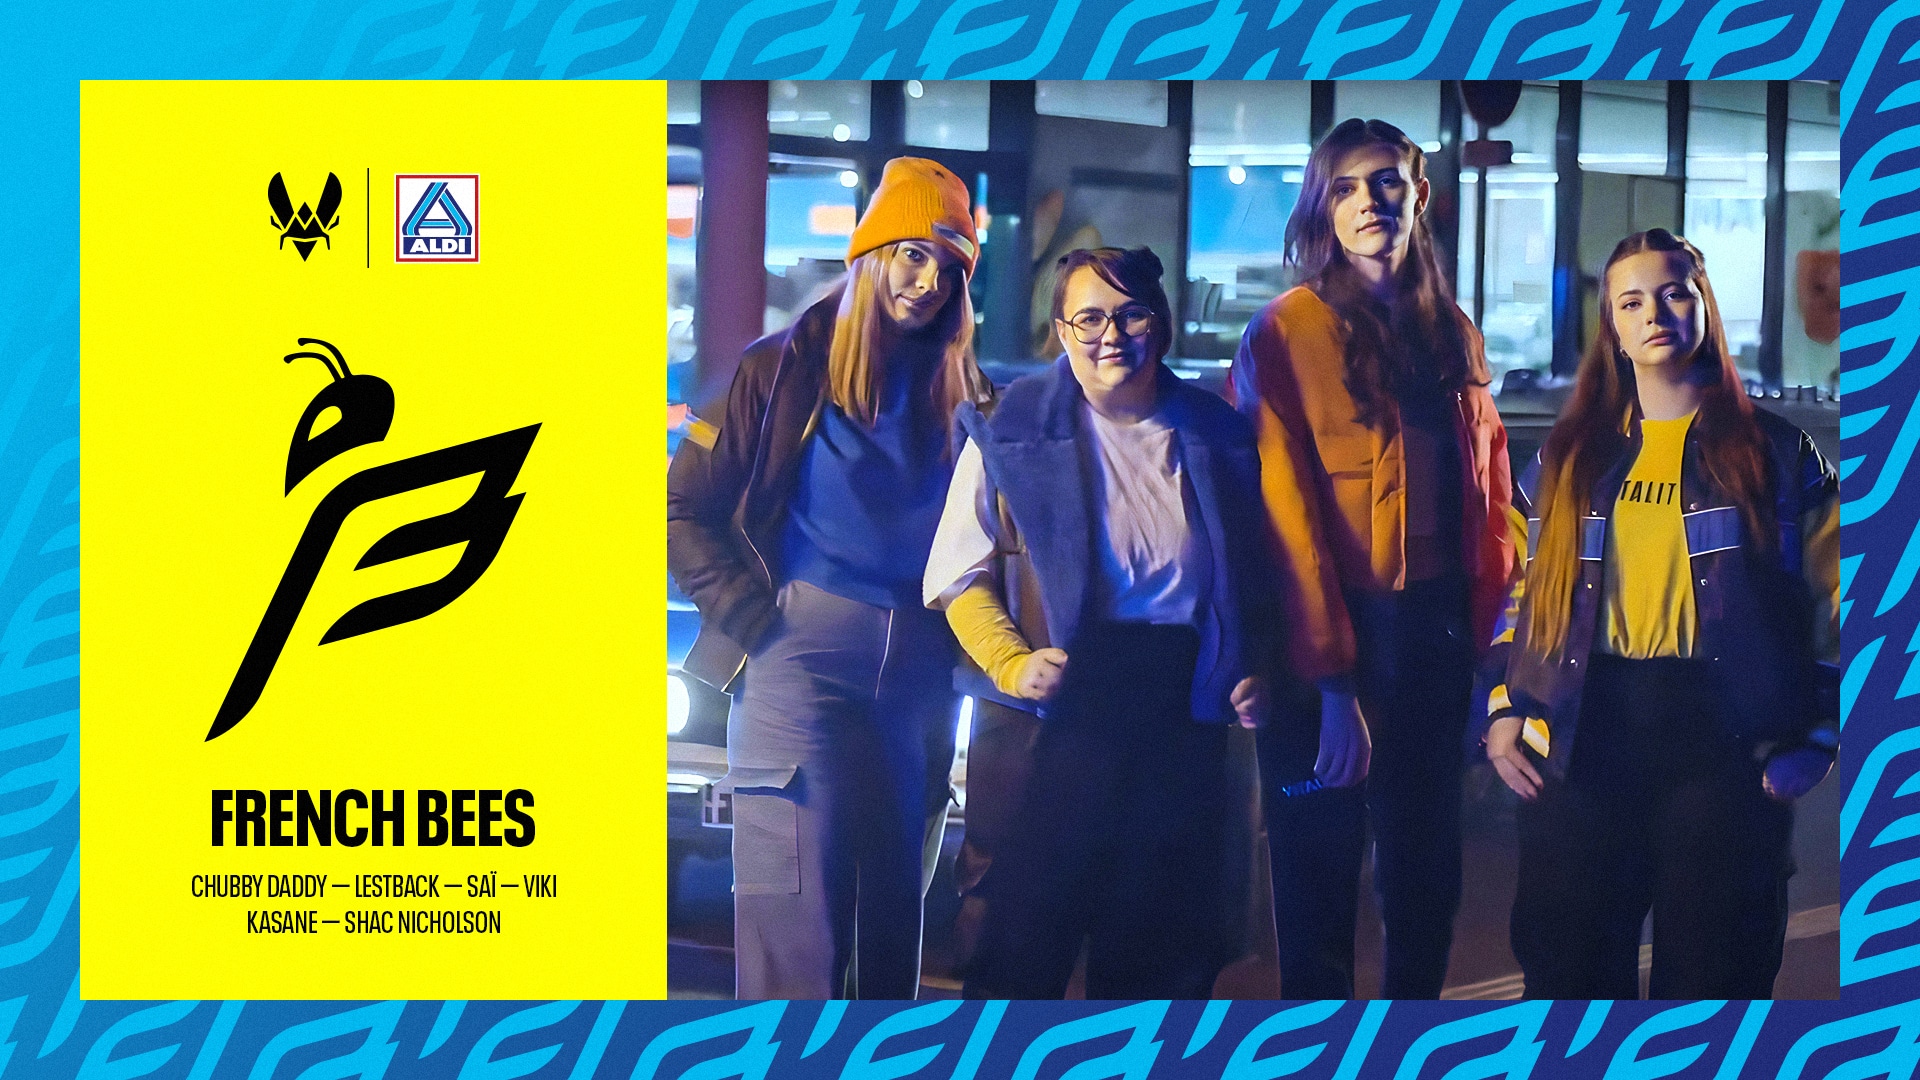 Team Vitality Debuts Its First League of Legends Women’s Team, the “French Bees”